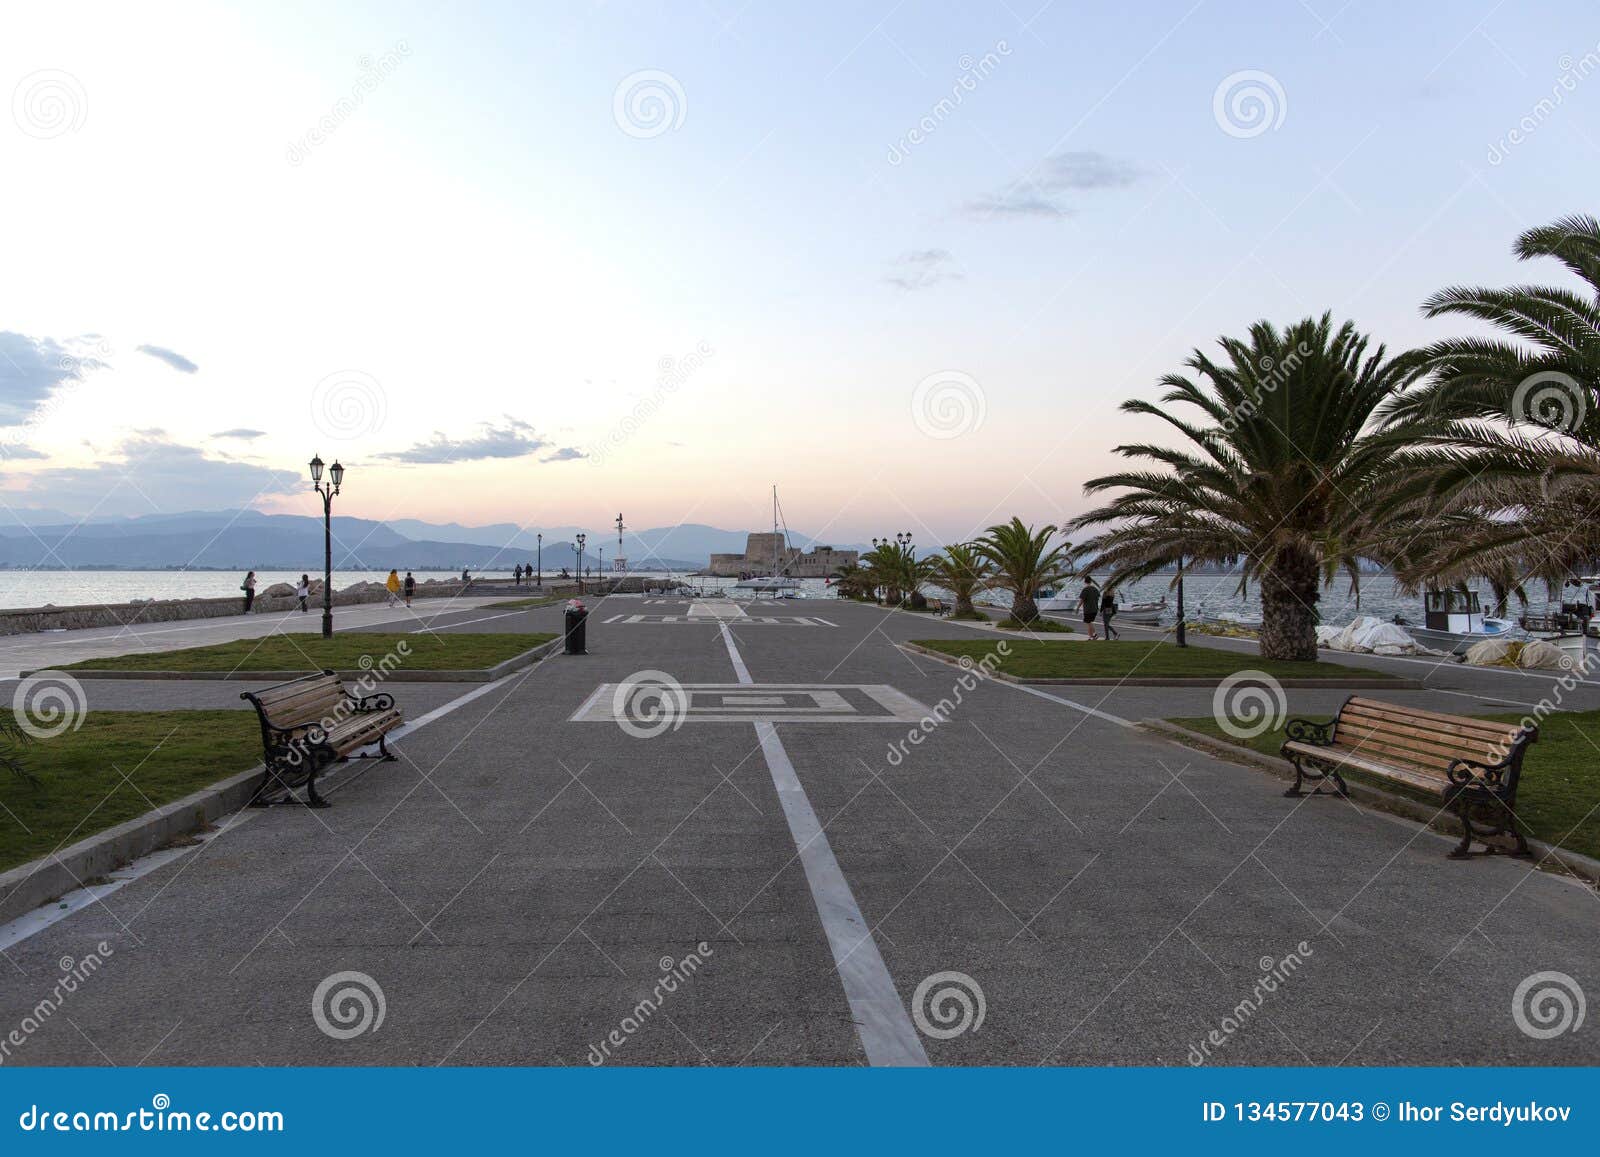 nafplio city in greece. view to old city of nafplio, peloponnese, greece -immagine